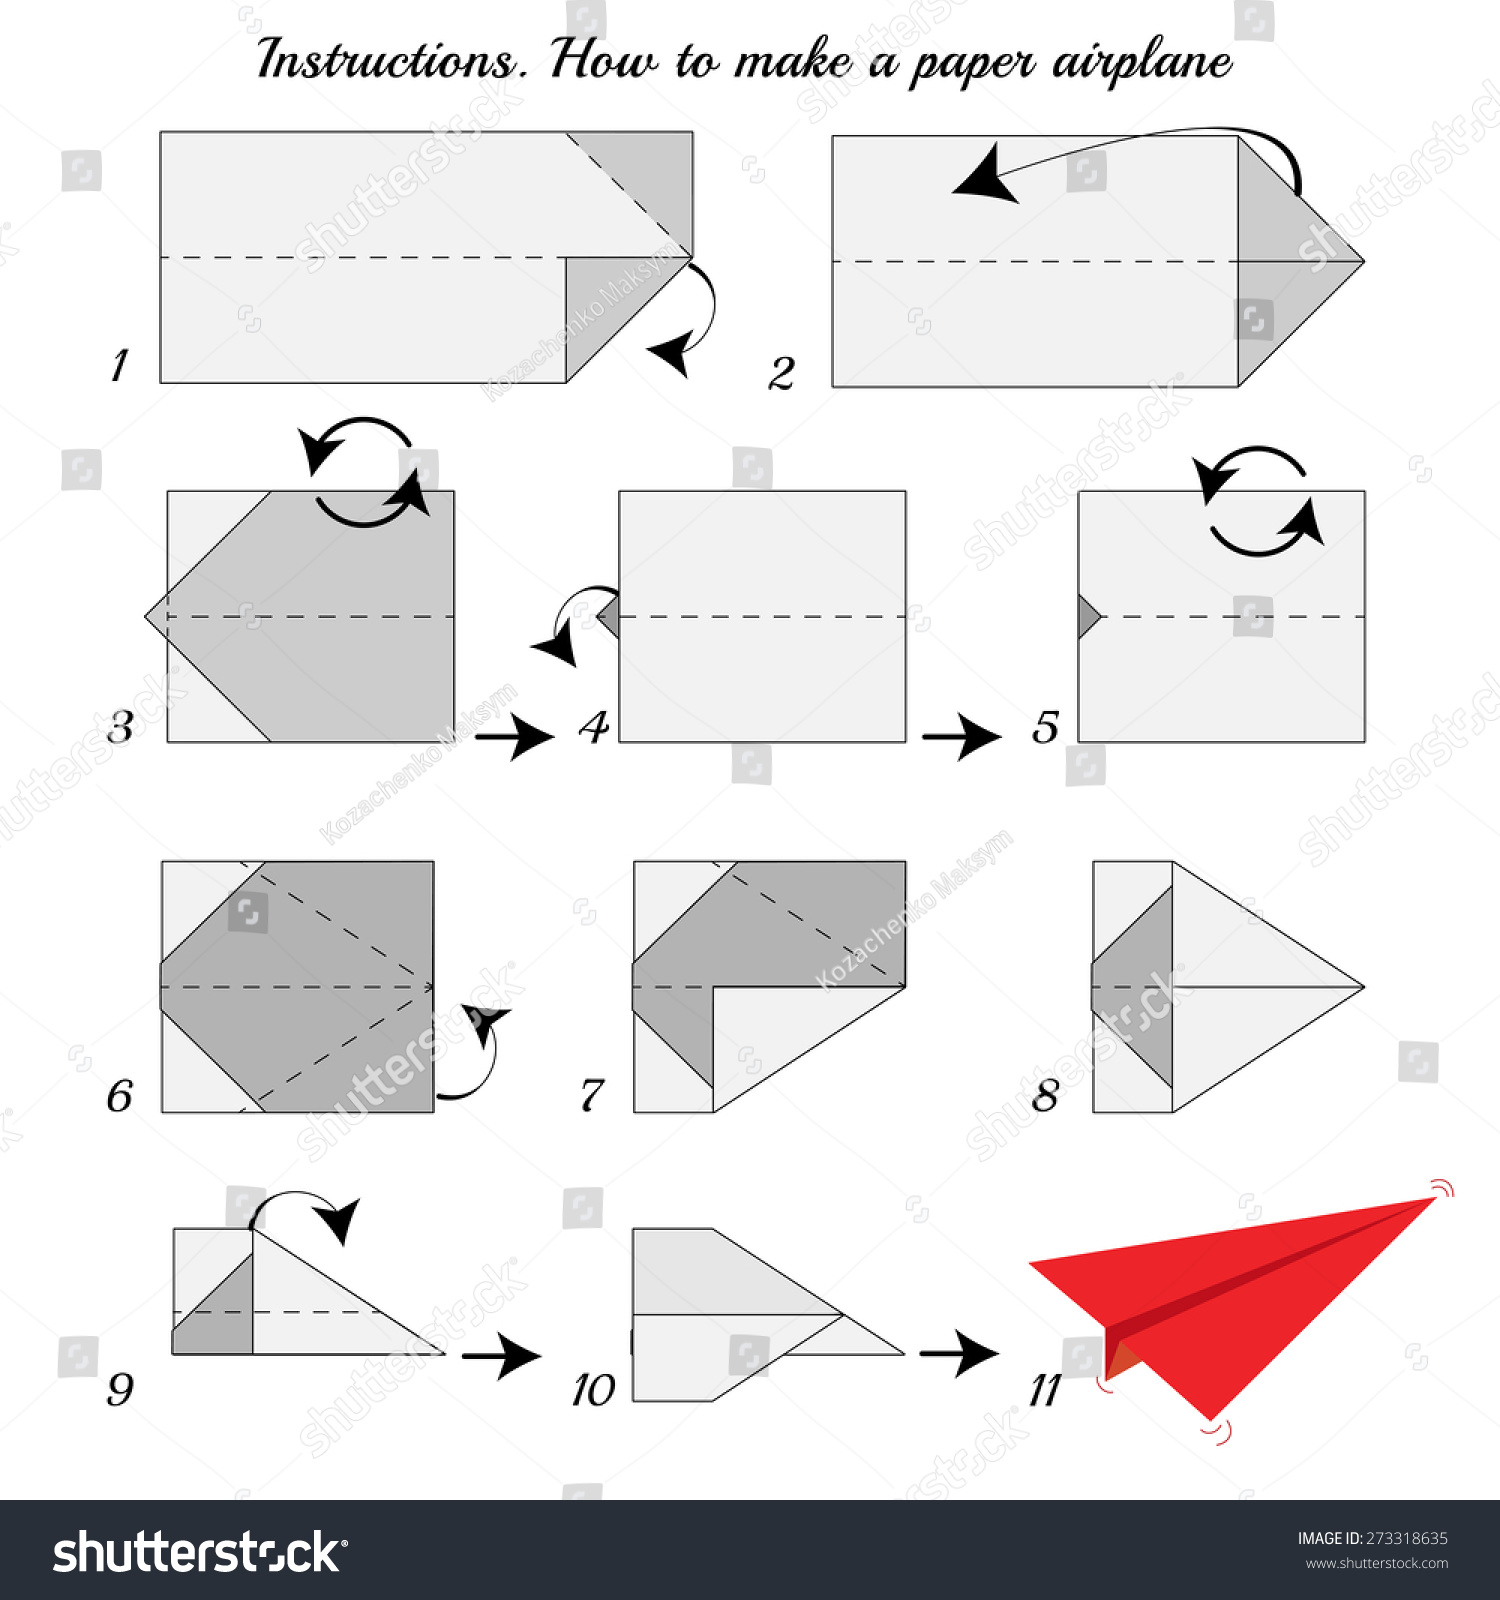 3 ways to make a paper airplane   wikihow